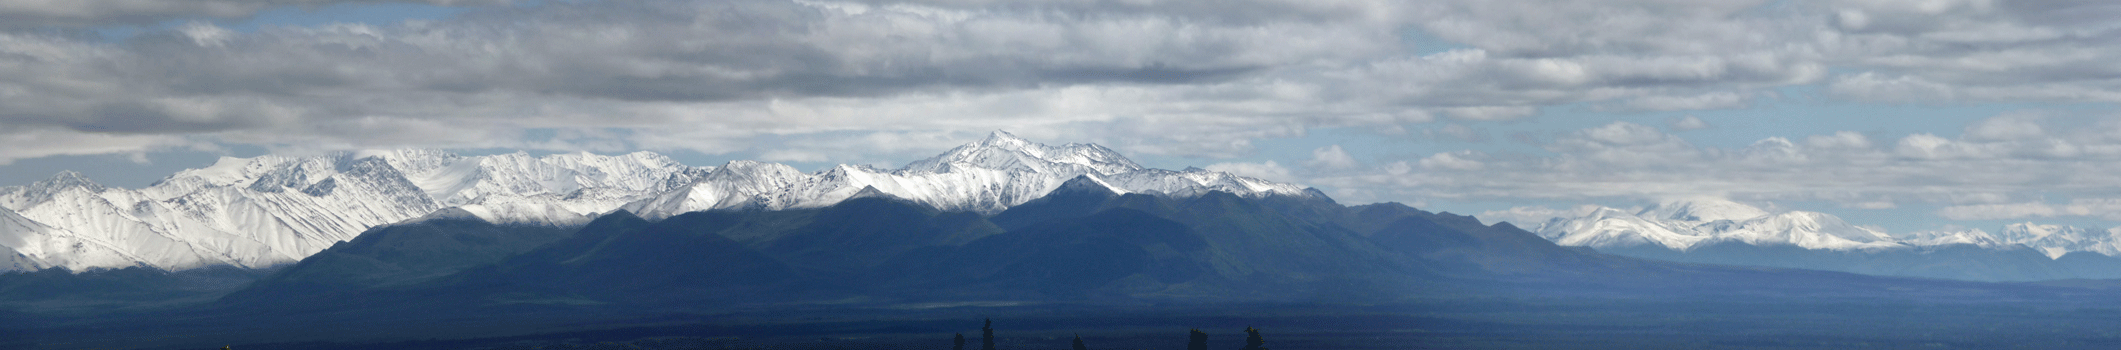 Wrangell Mountains from Nabesna Road